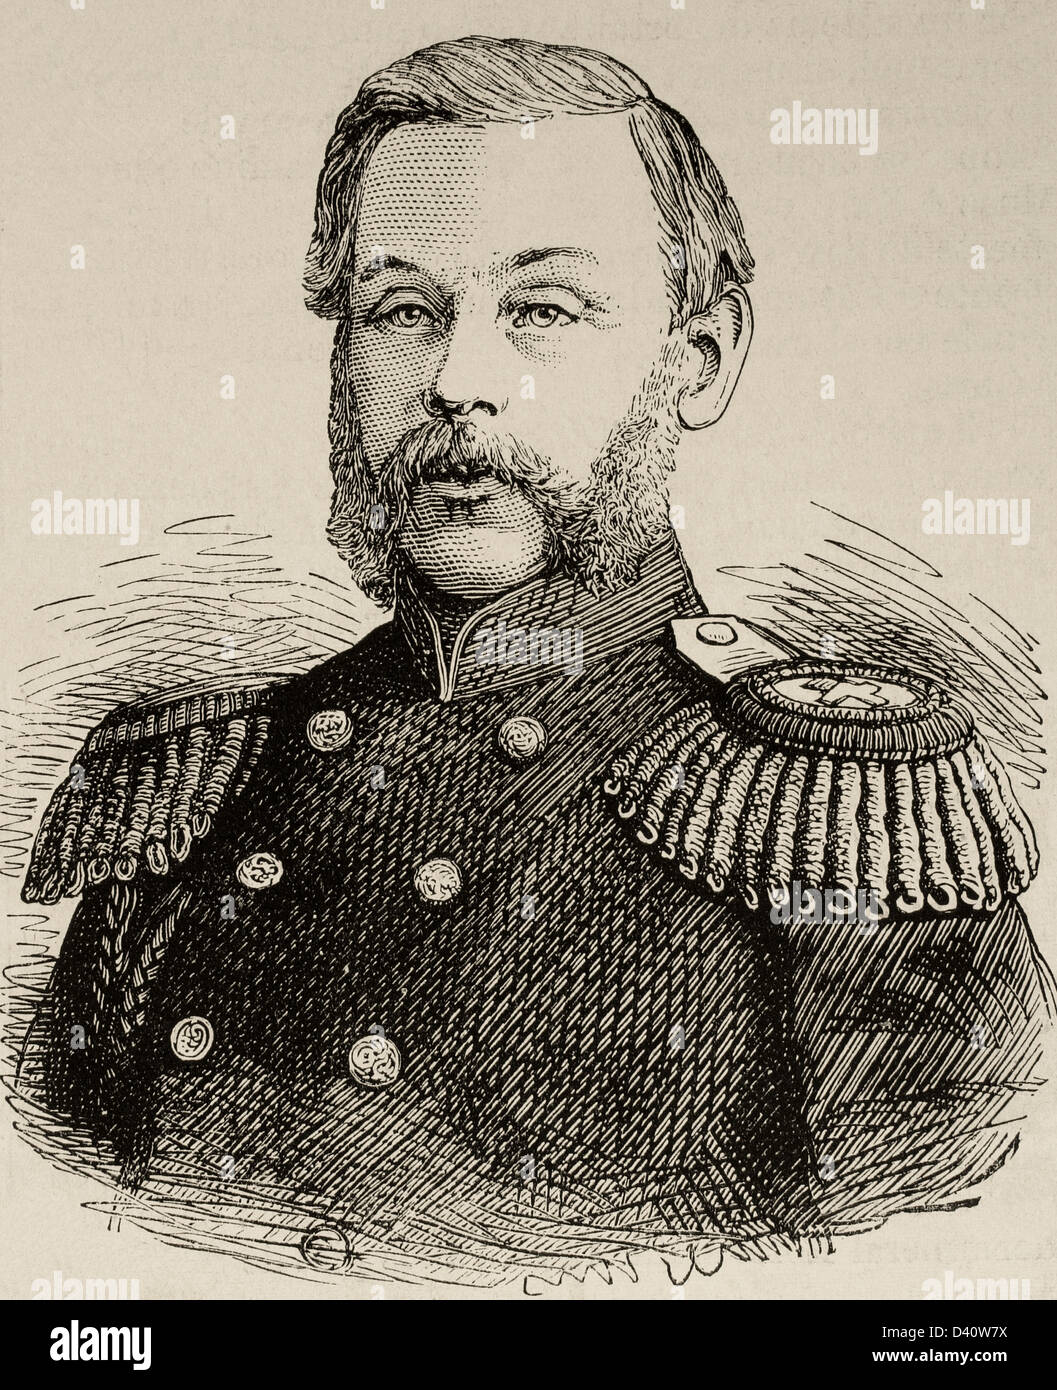 Dmitry Milyutin (1816-1912). Russian Field Marshal and Minister of War. Engraving in Spanish and American Illustration, 1877. Stock Photo